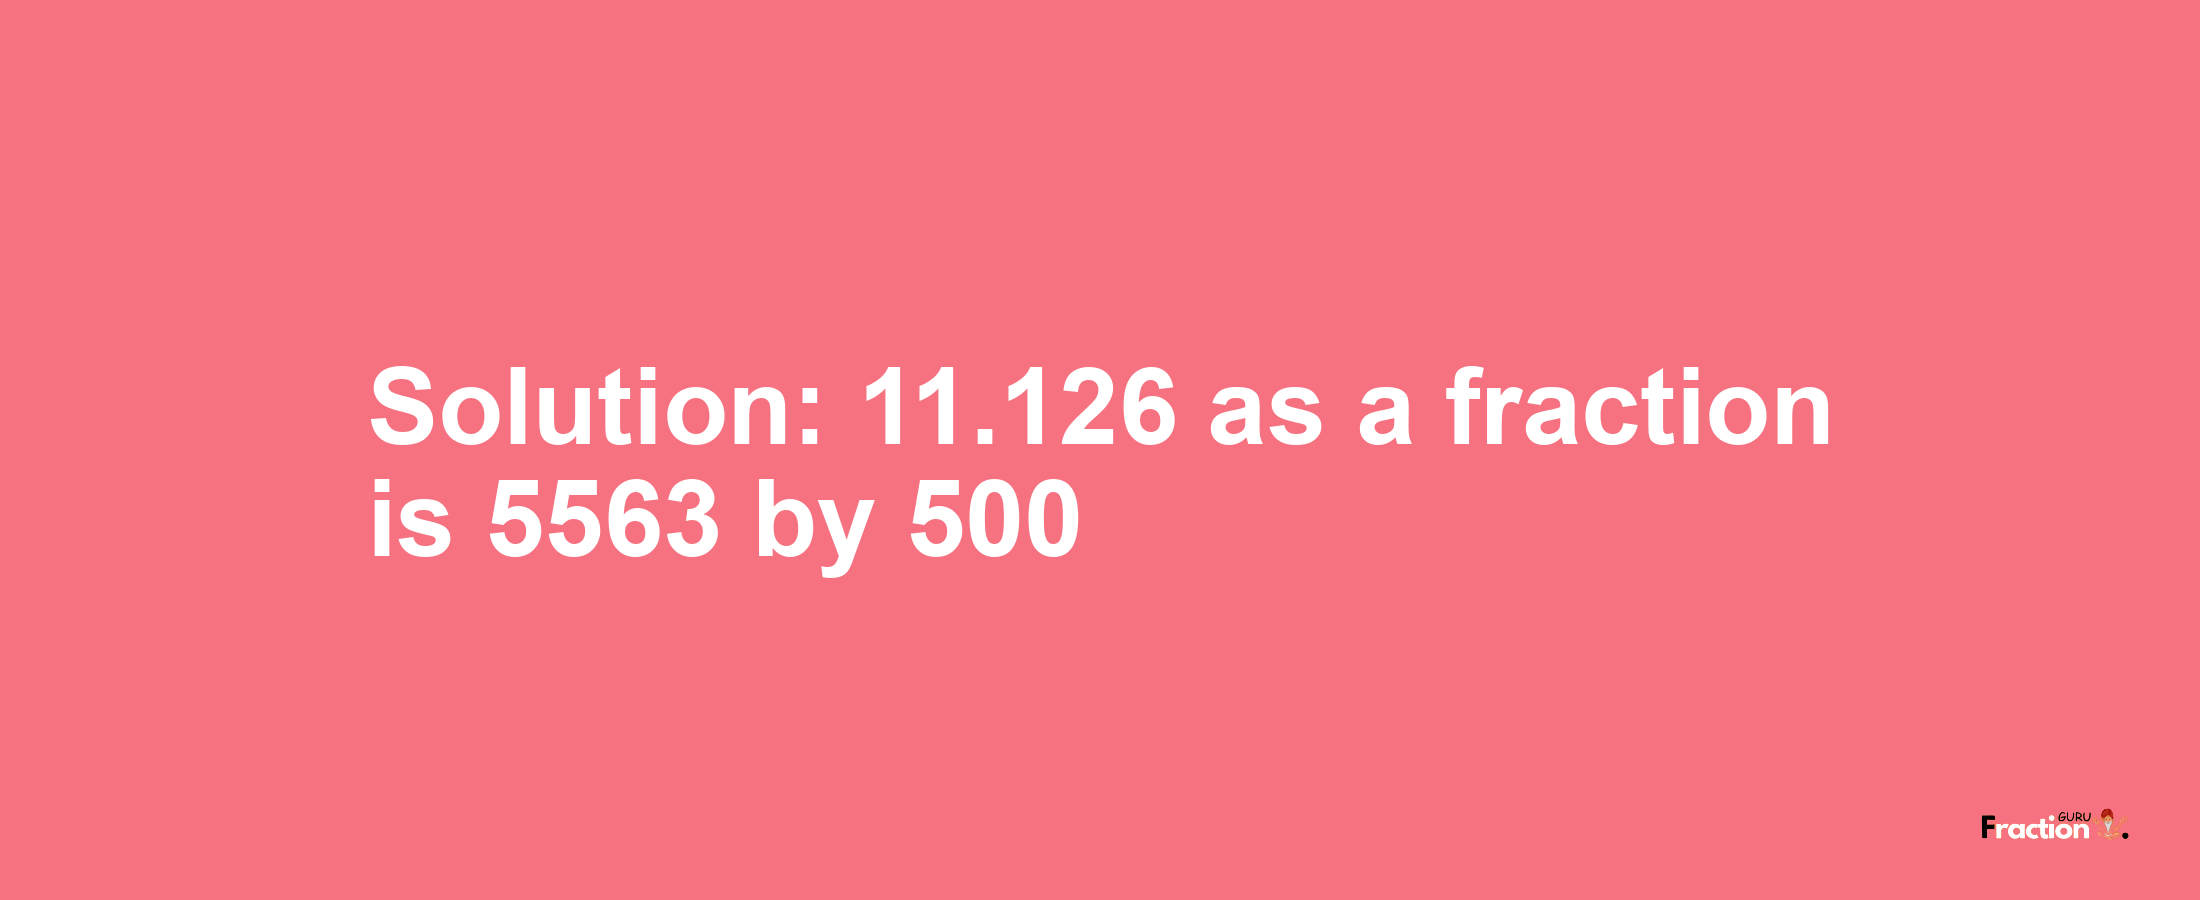 Solution:11.126 as a fraction is 5563/500